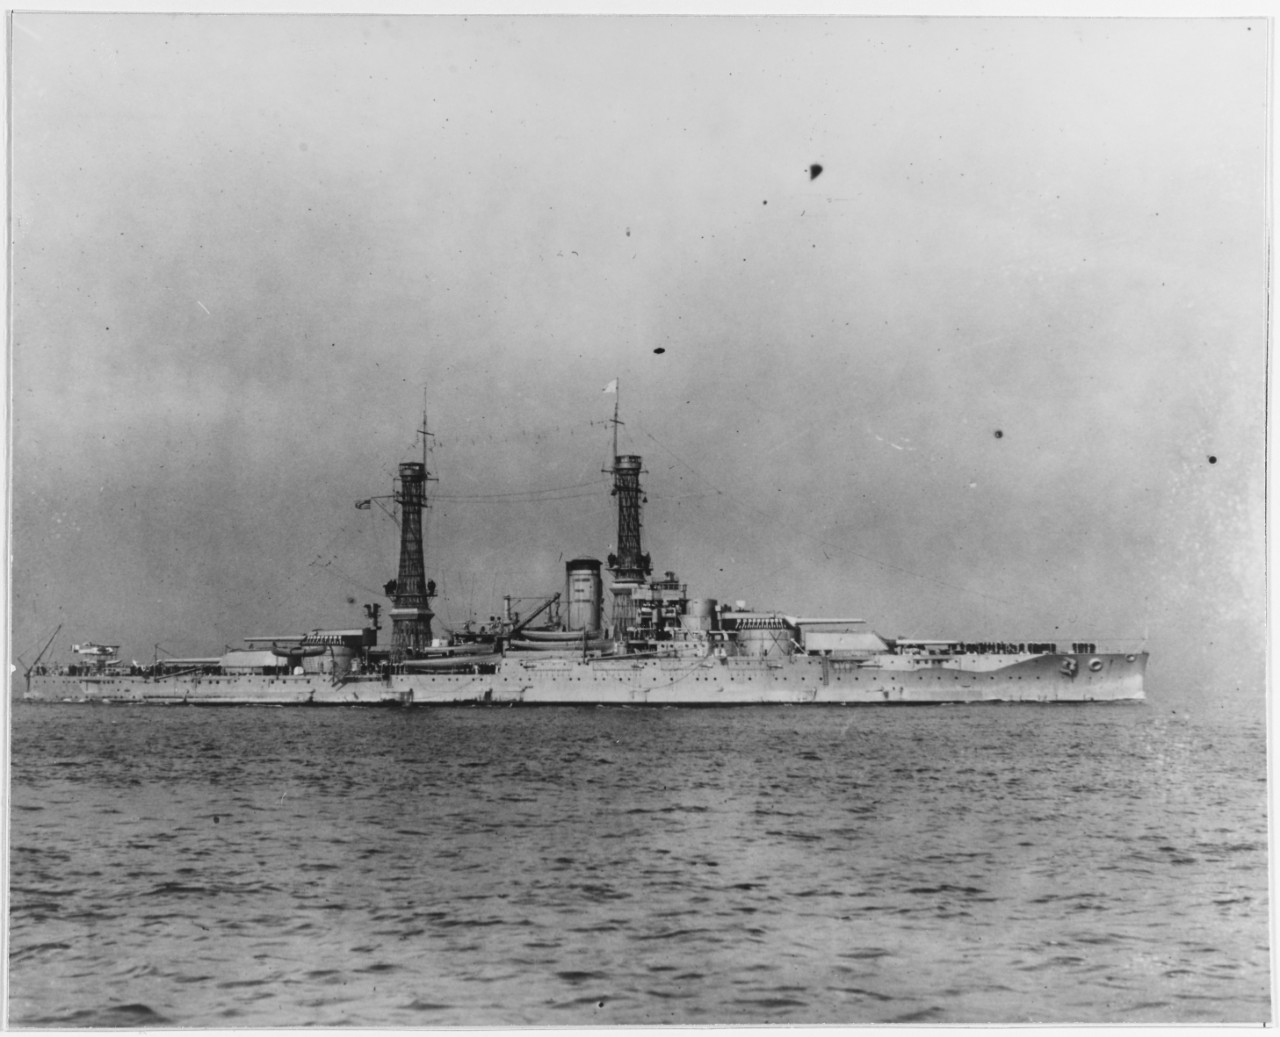 USS NEVADA (BB-36) in the mid-1920s